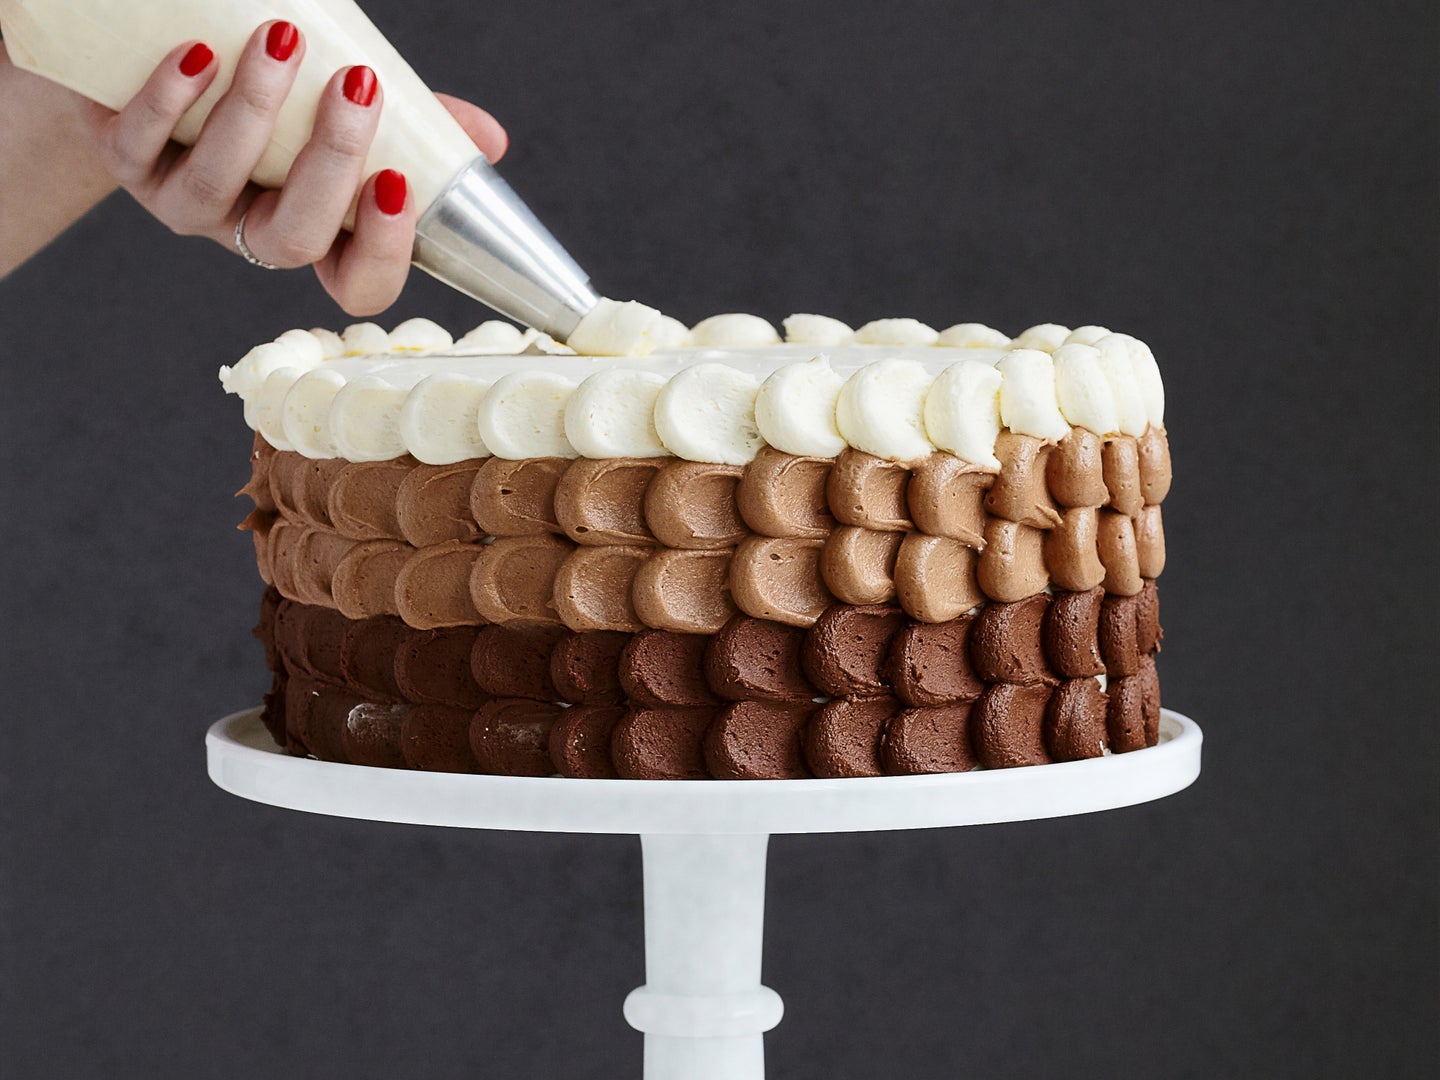 A person using a piping bag to pipe frosting onto a chocolate cake.